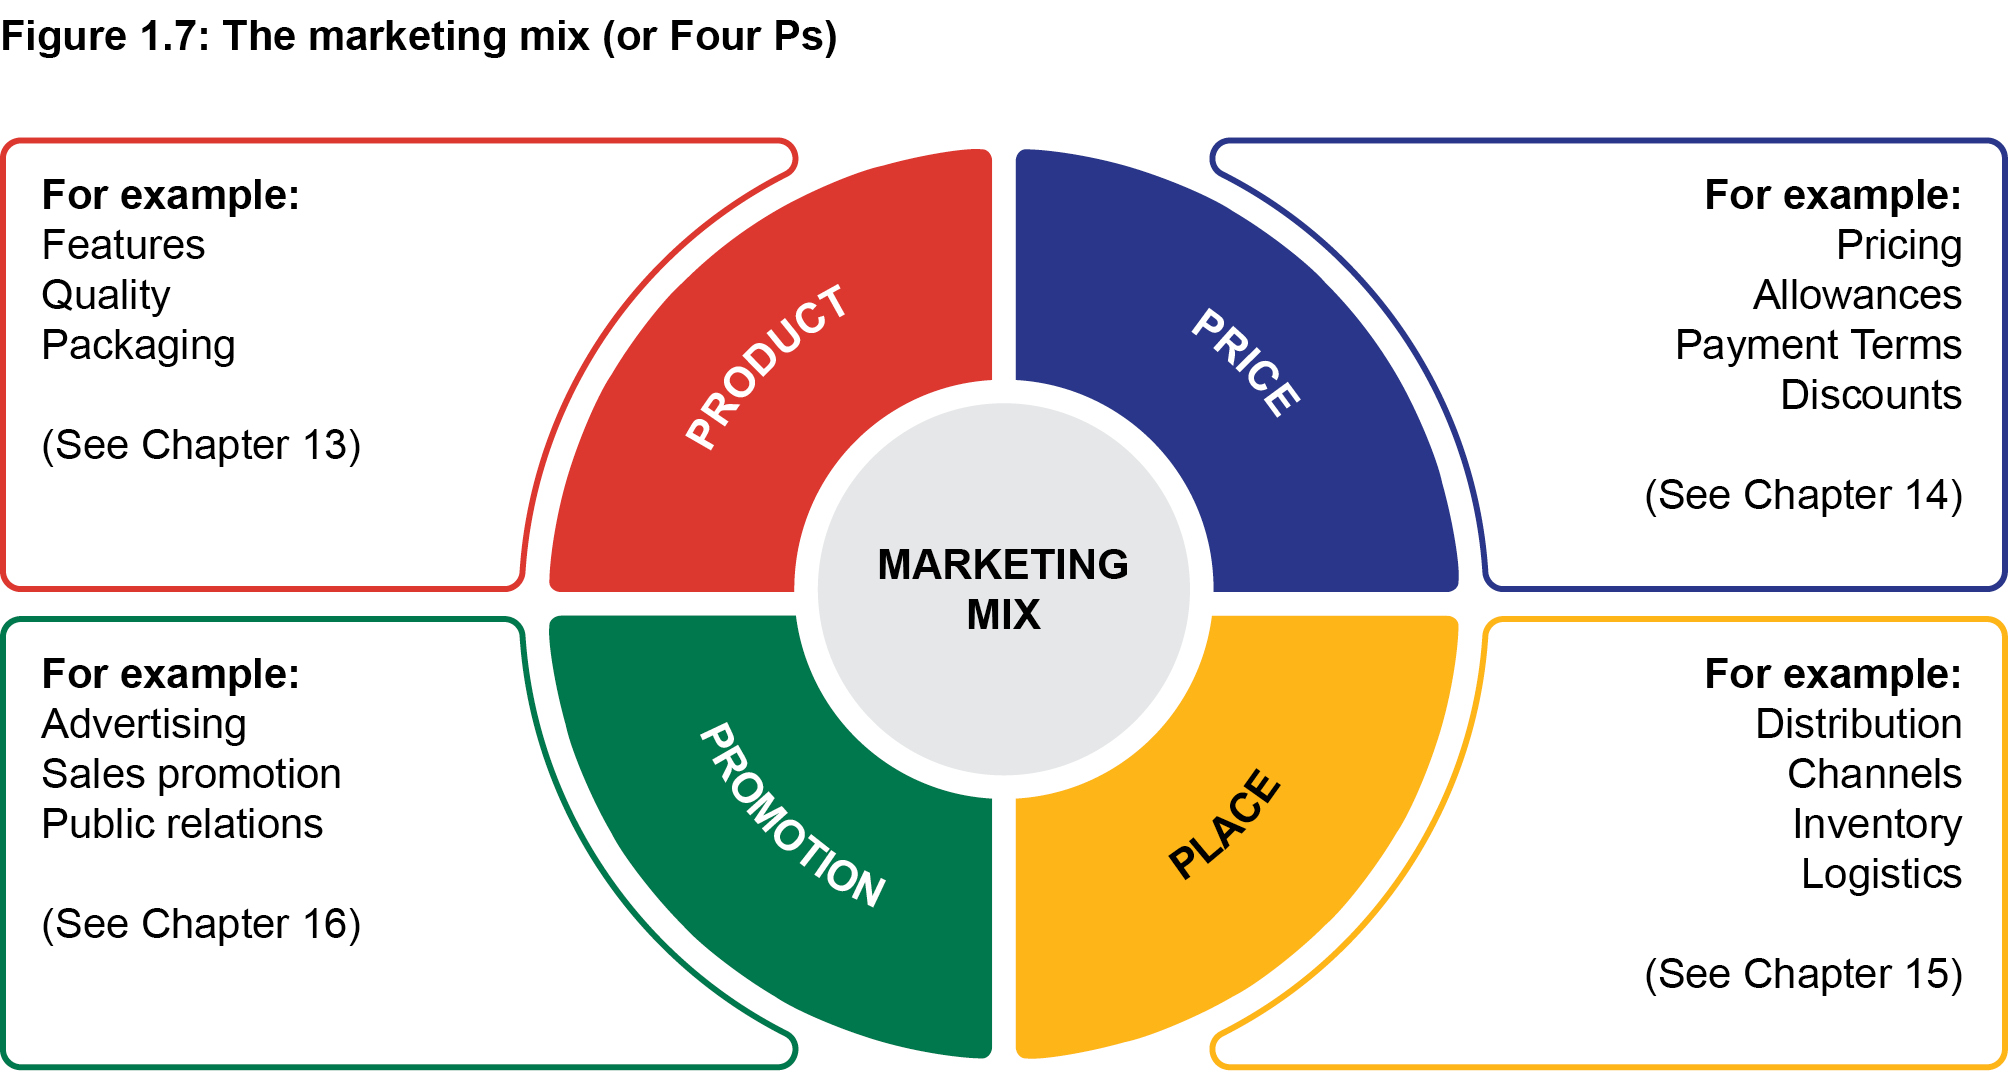 Figure 1.7: The marketing mix (of Four Ps)